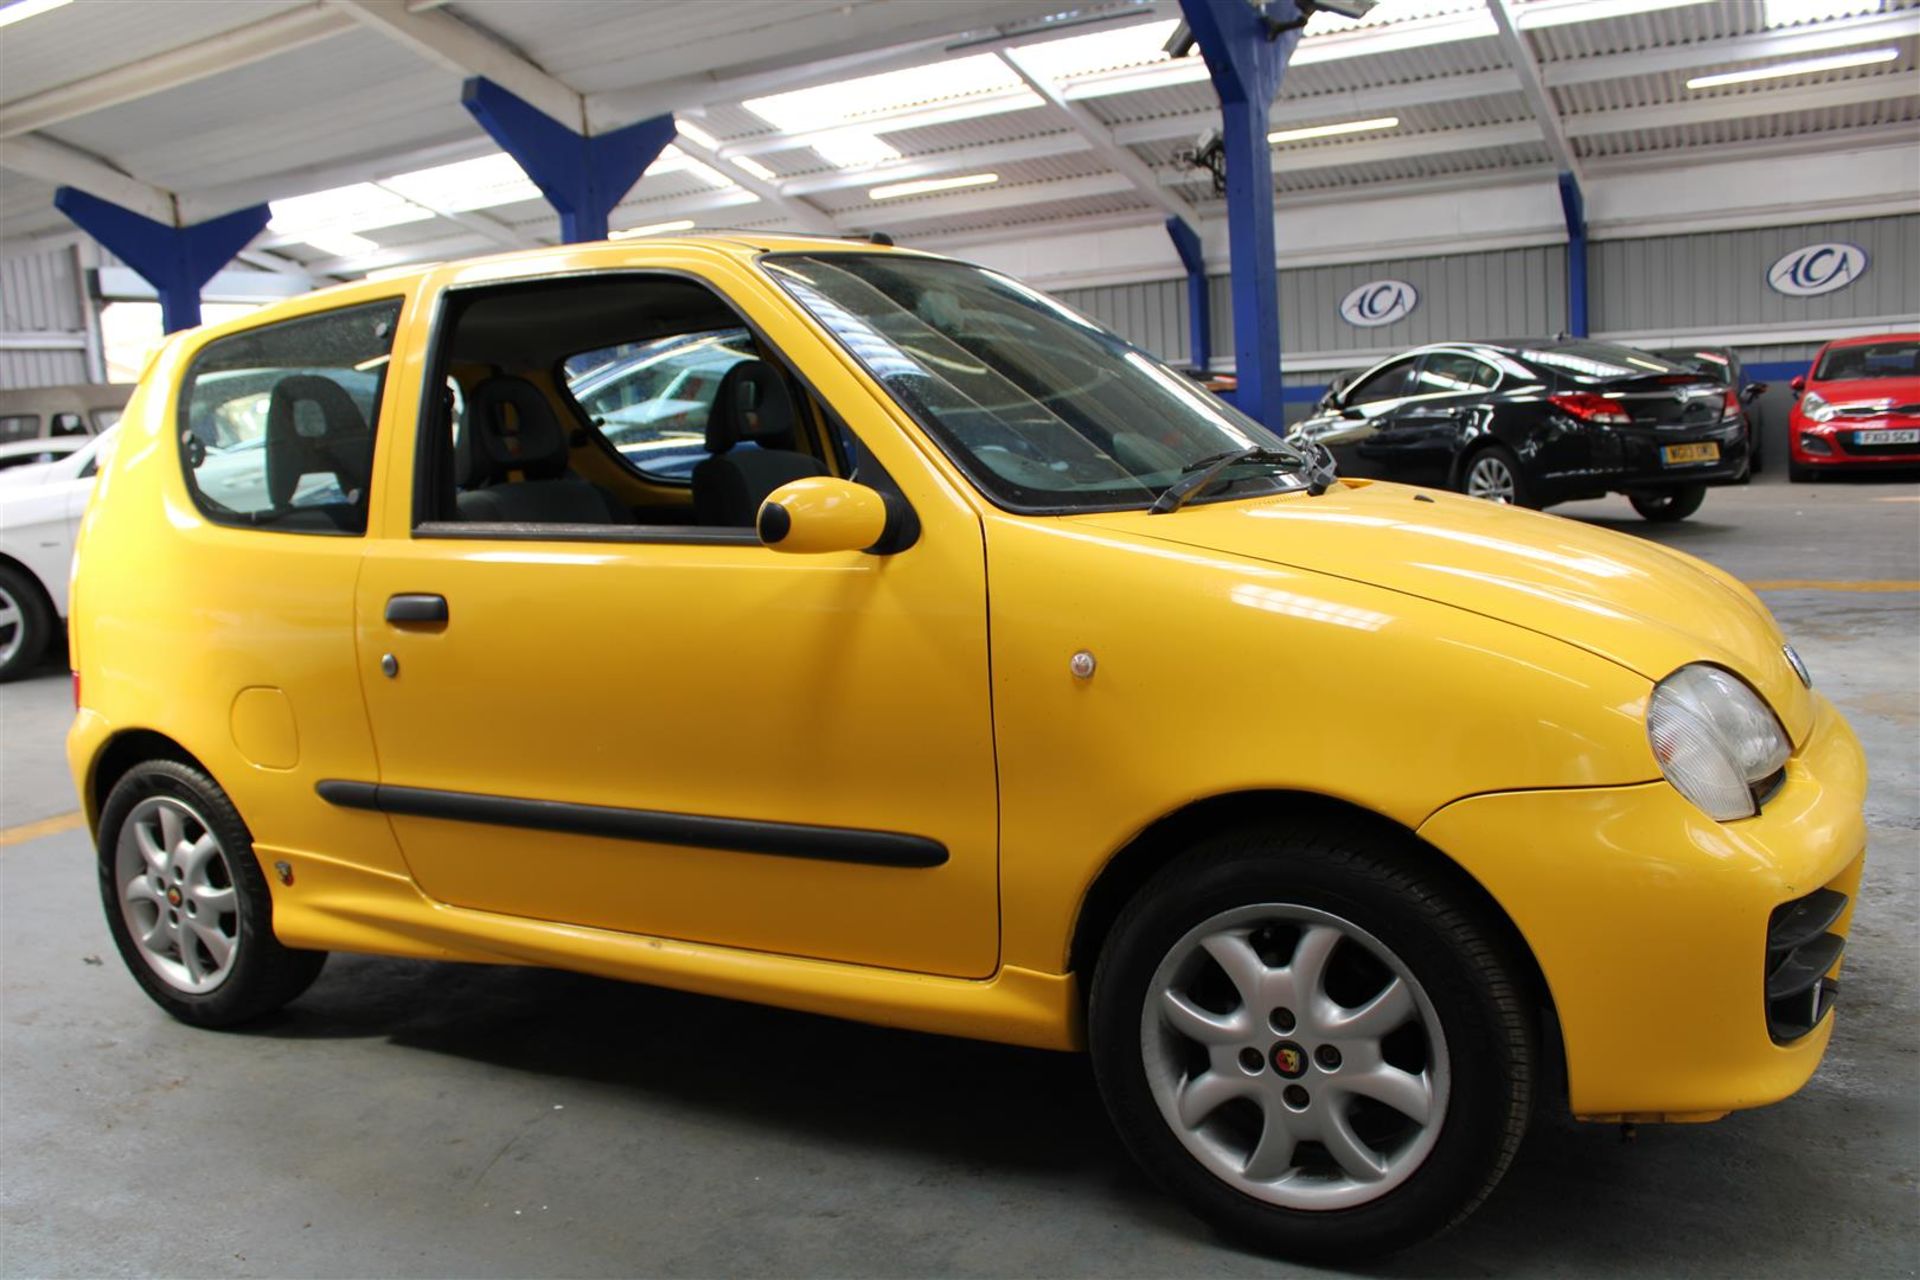 2001 Fiat Seicento Sporting - Image 19 of 23